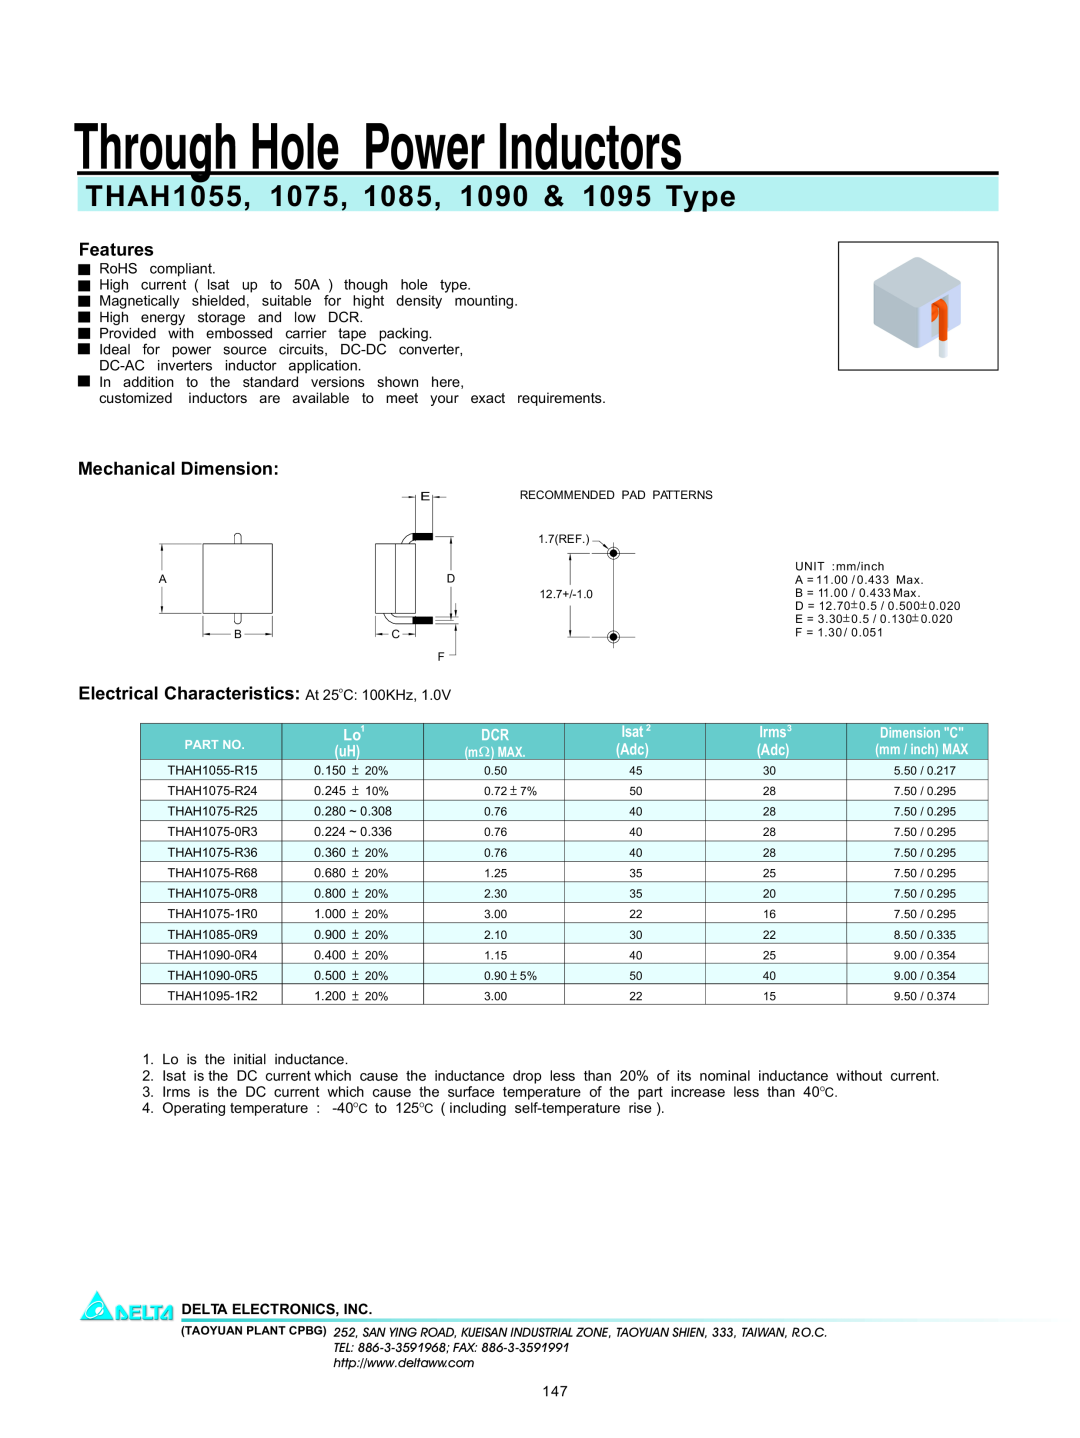 Delta Electronics manual Through Hole Power Inductors, THAH1055, 1075, 1085, 1090 & 1095 Type, Features, Isat, Irms 